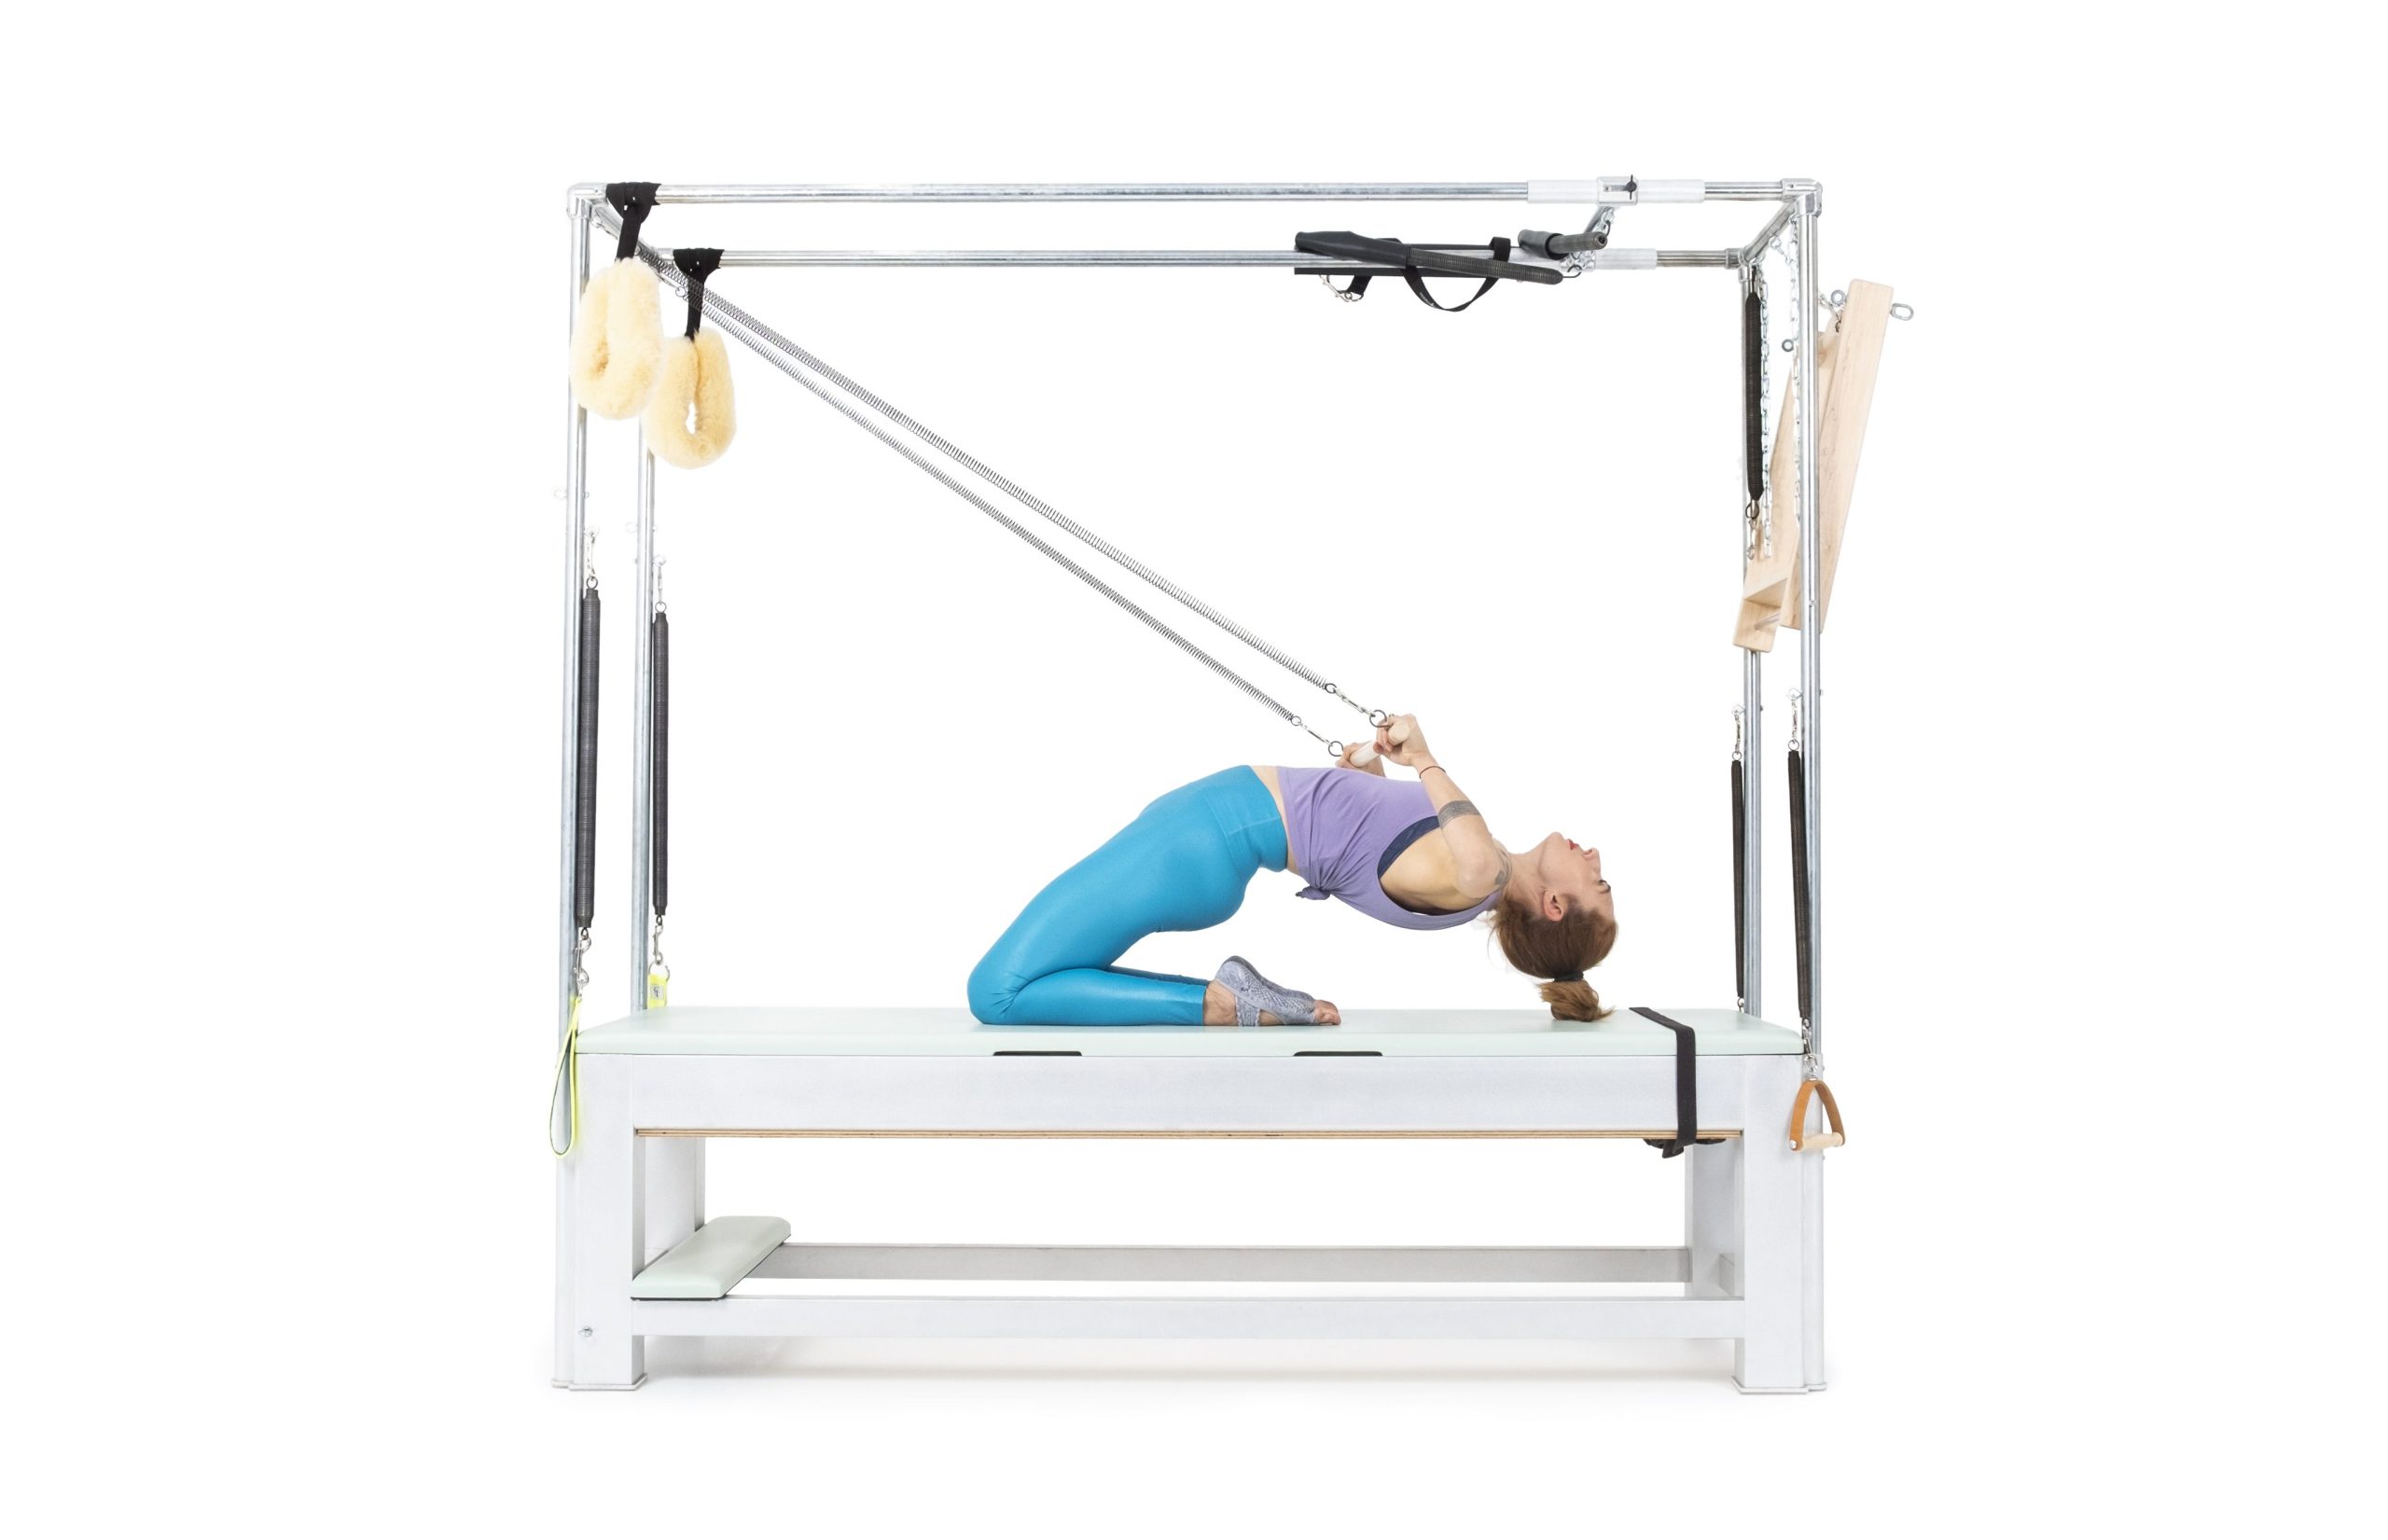 Rolling-In-and-Out-with-Roll-Back-Bar-on-the-Cadillac-or-Tower Online Pilates Classes